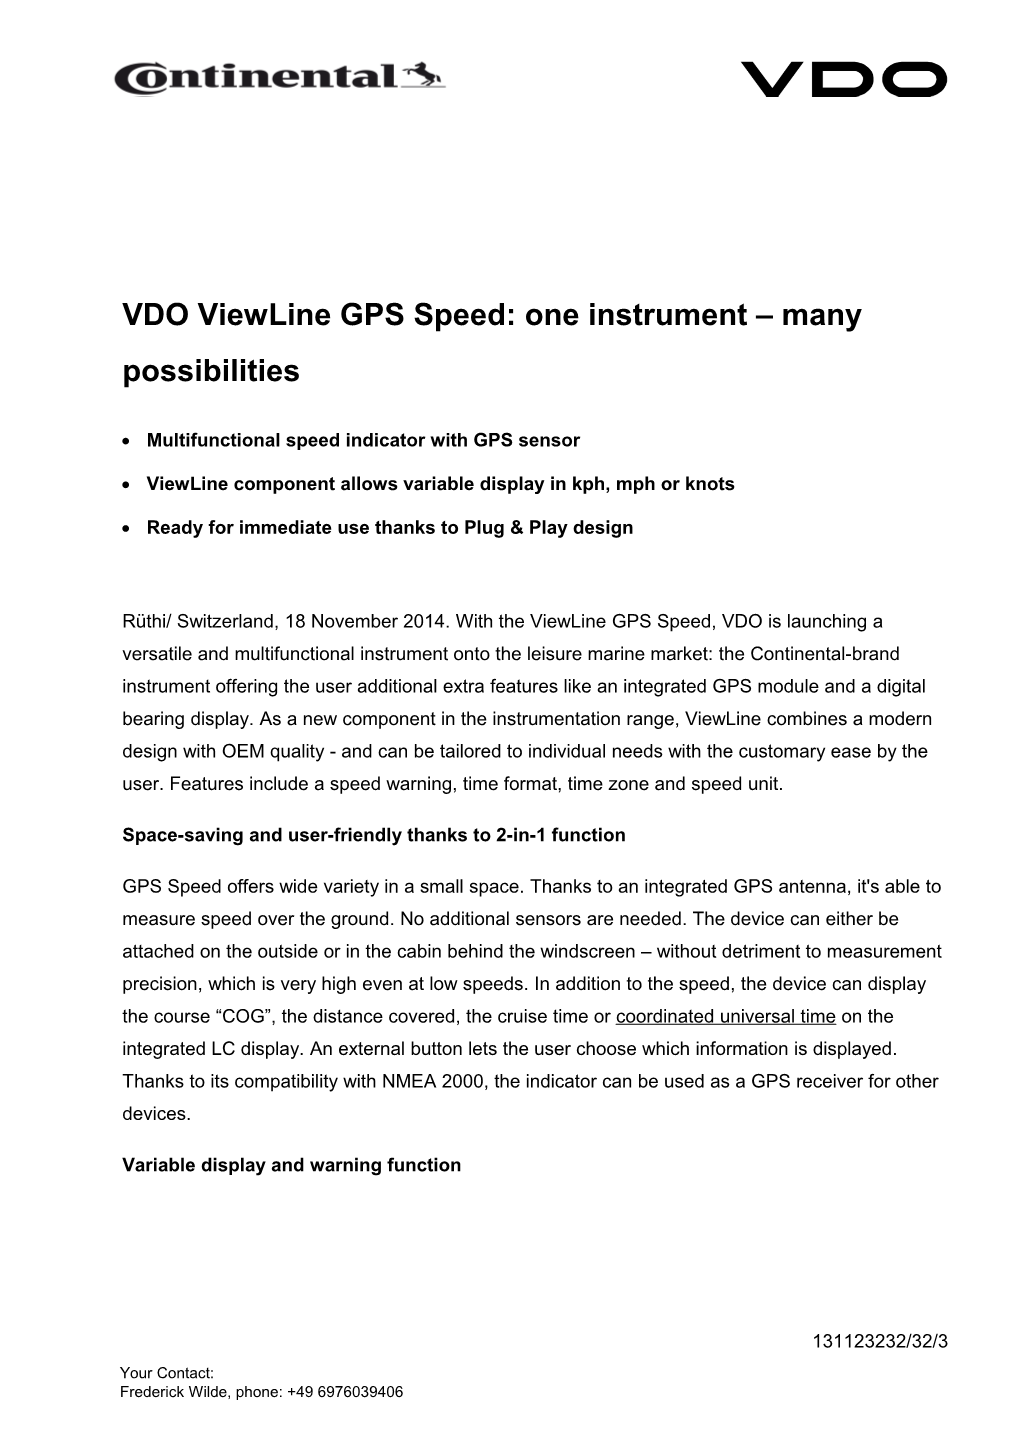 VDO Viewline GPS Speed: One Instrument Many Possibilities